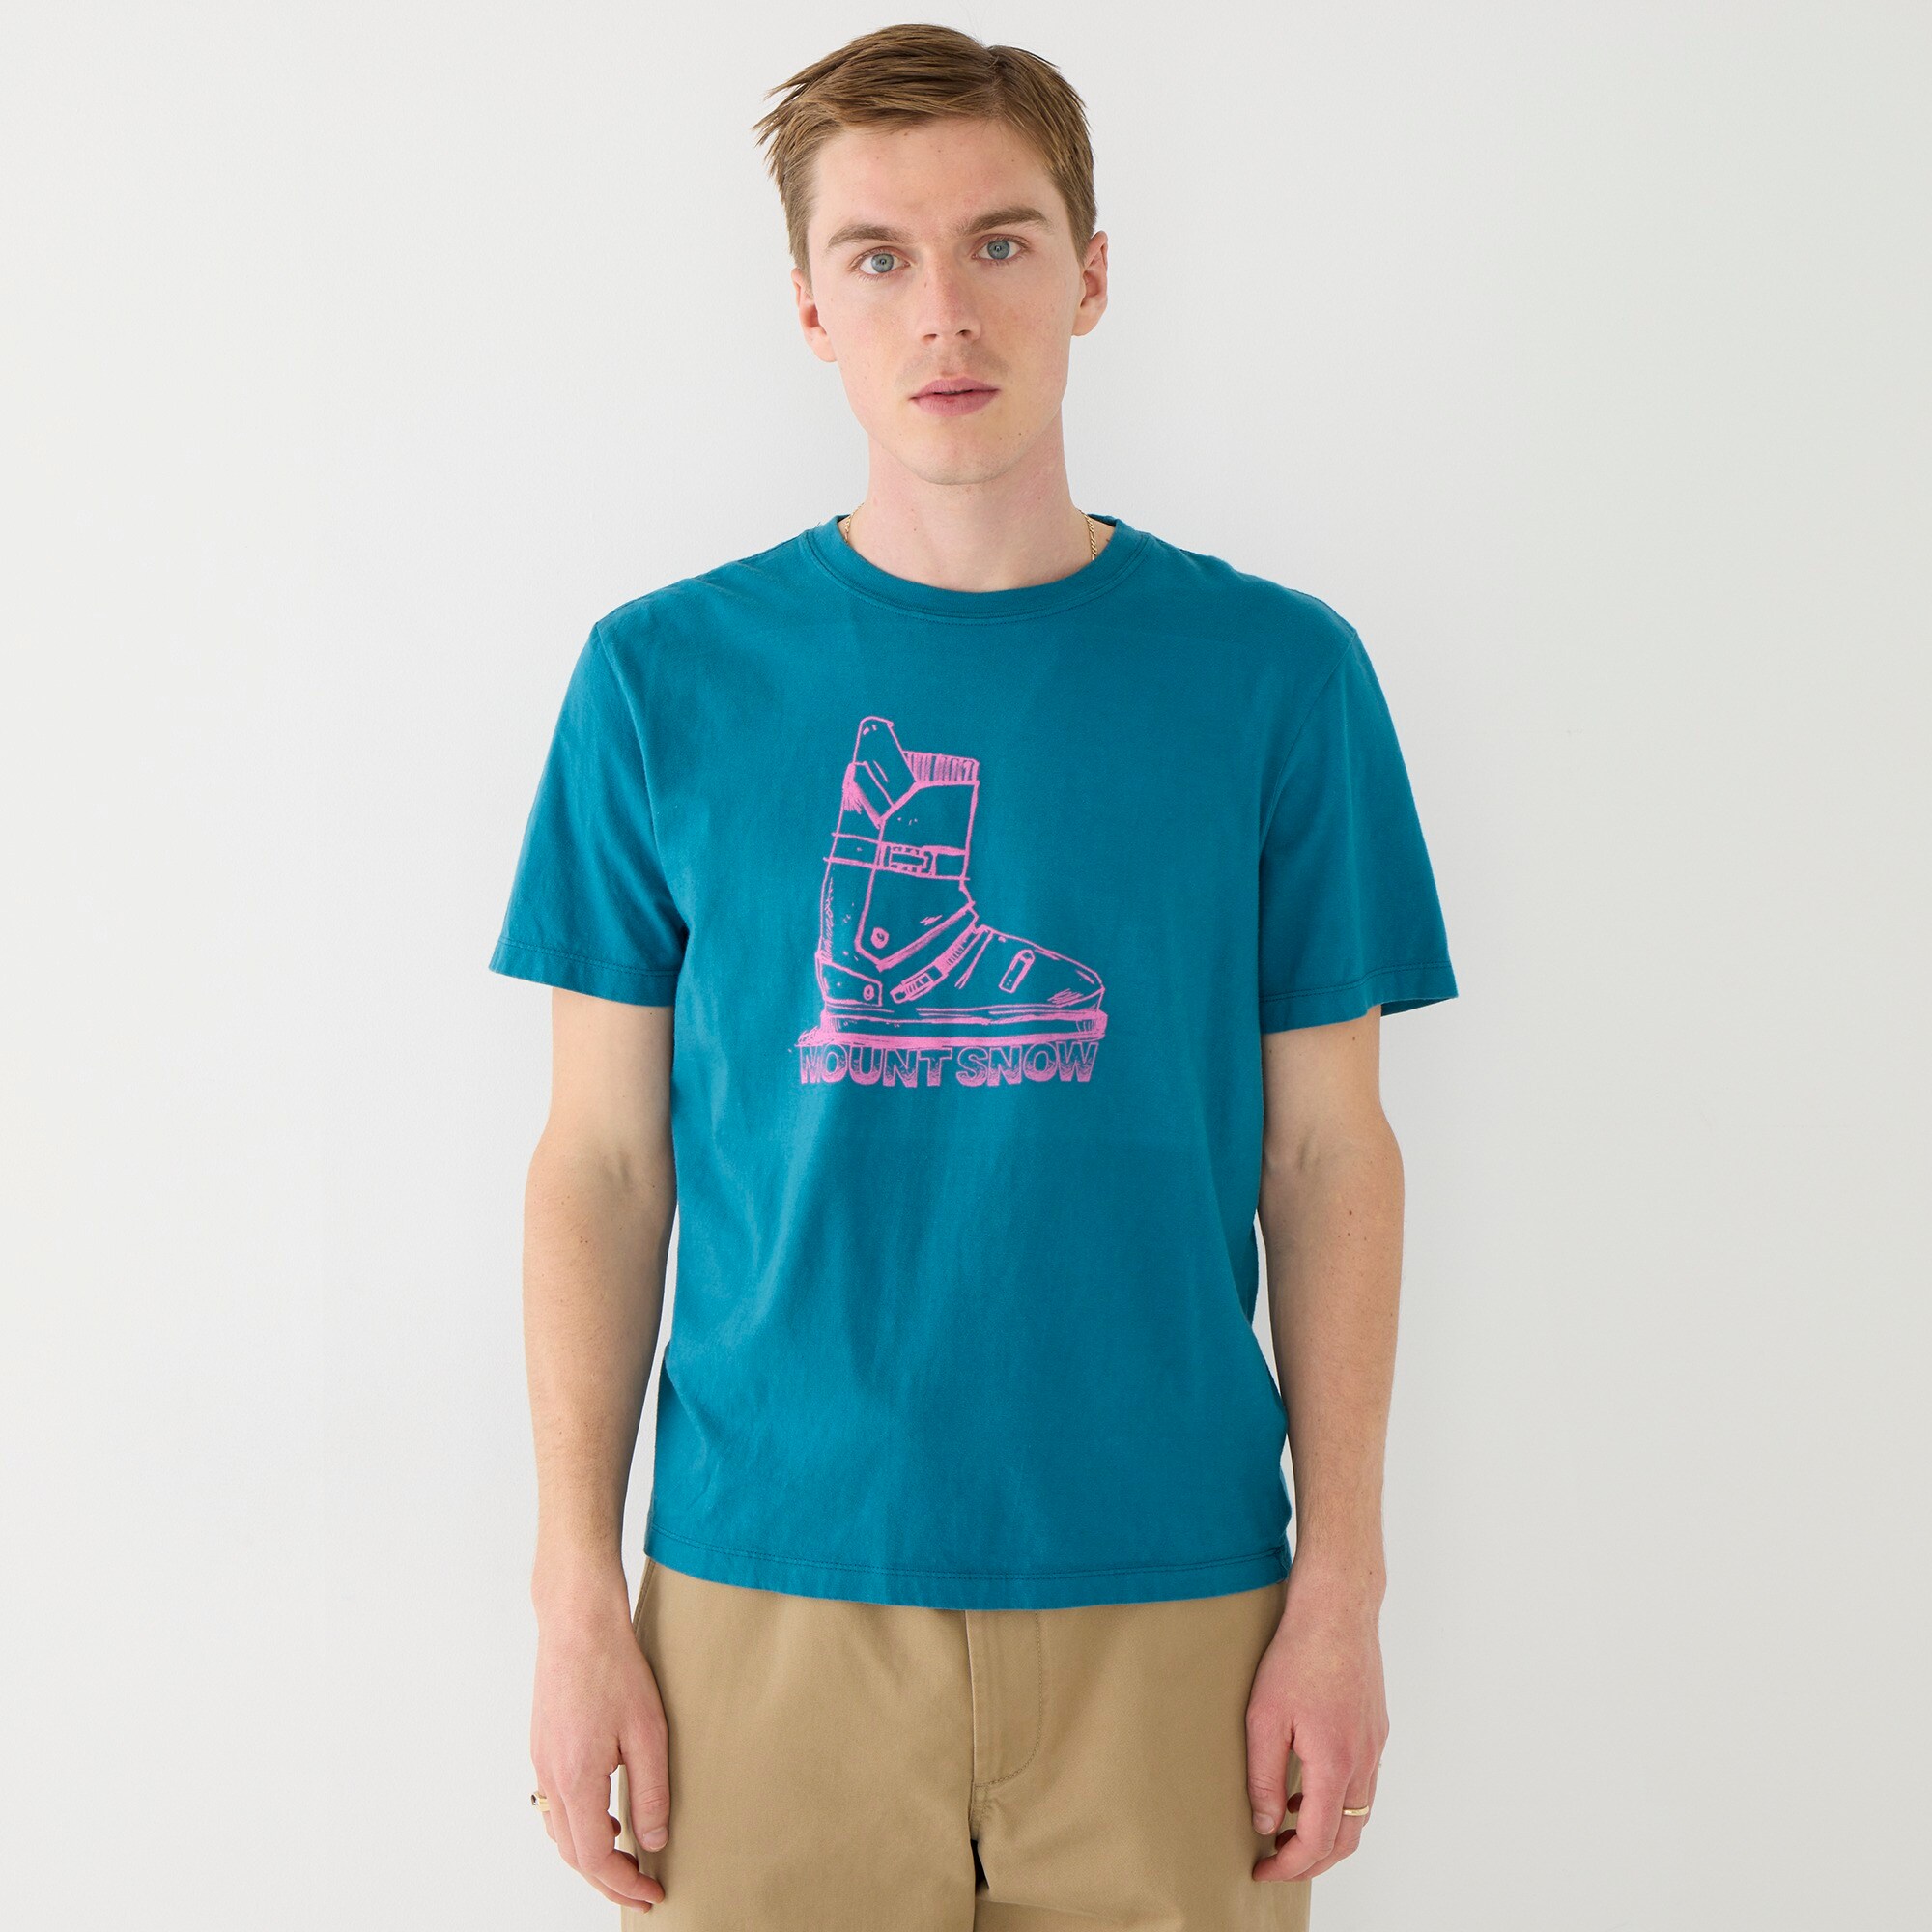 J.Crew: Mount Snow Made-in-the-USA Ski Boot T-shirt For Men